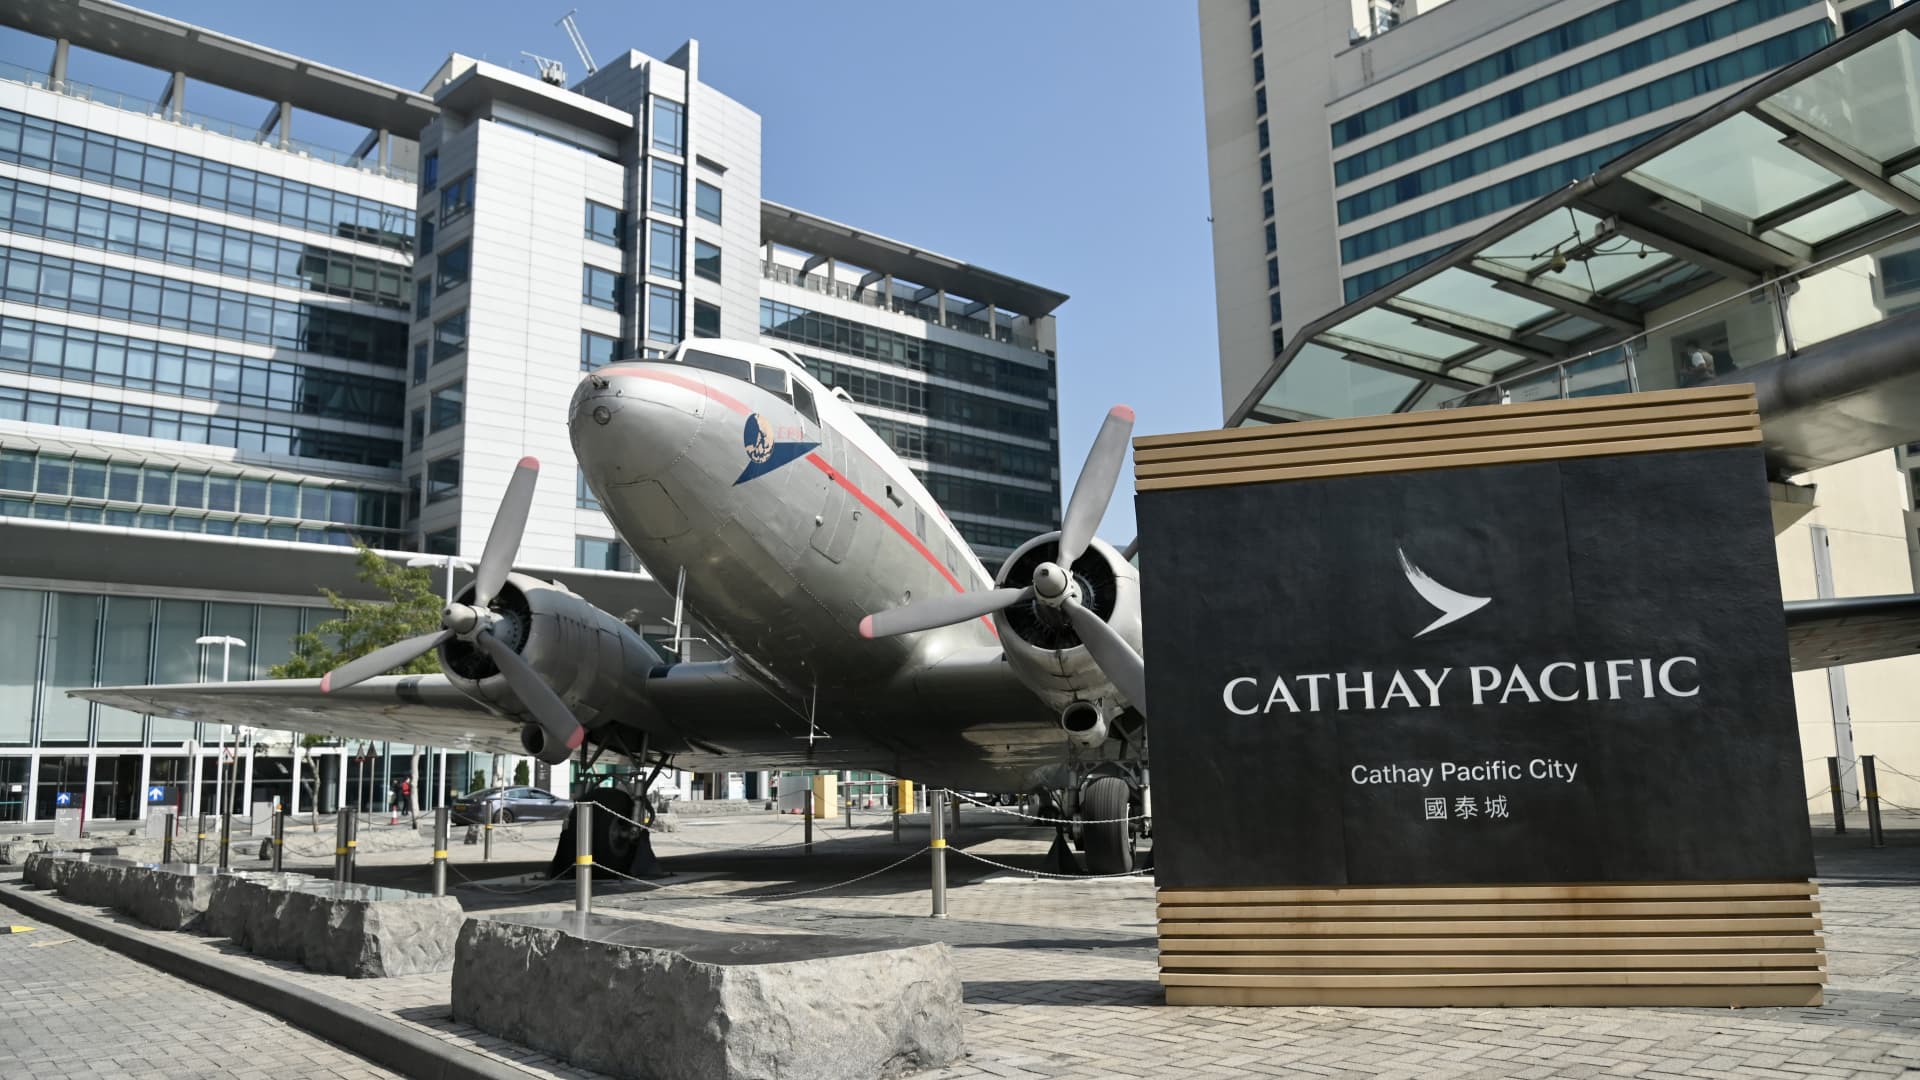 Cathay’s CEO wants to turn the airline back to profitability, but faces manpower constraints